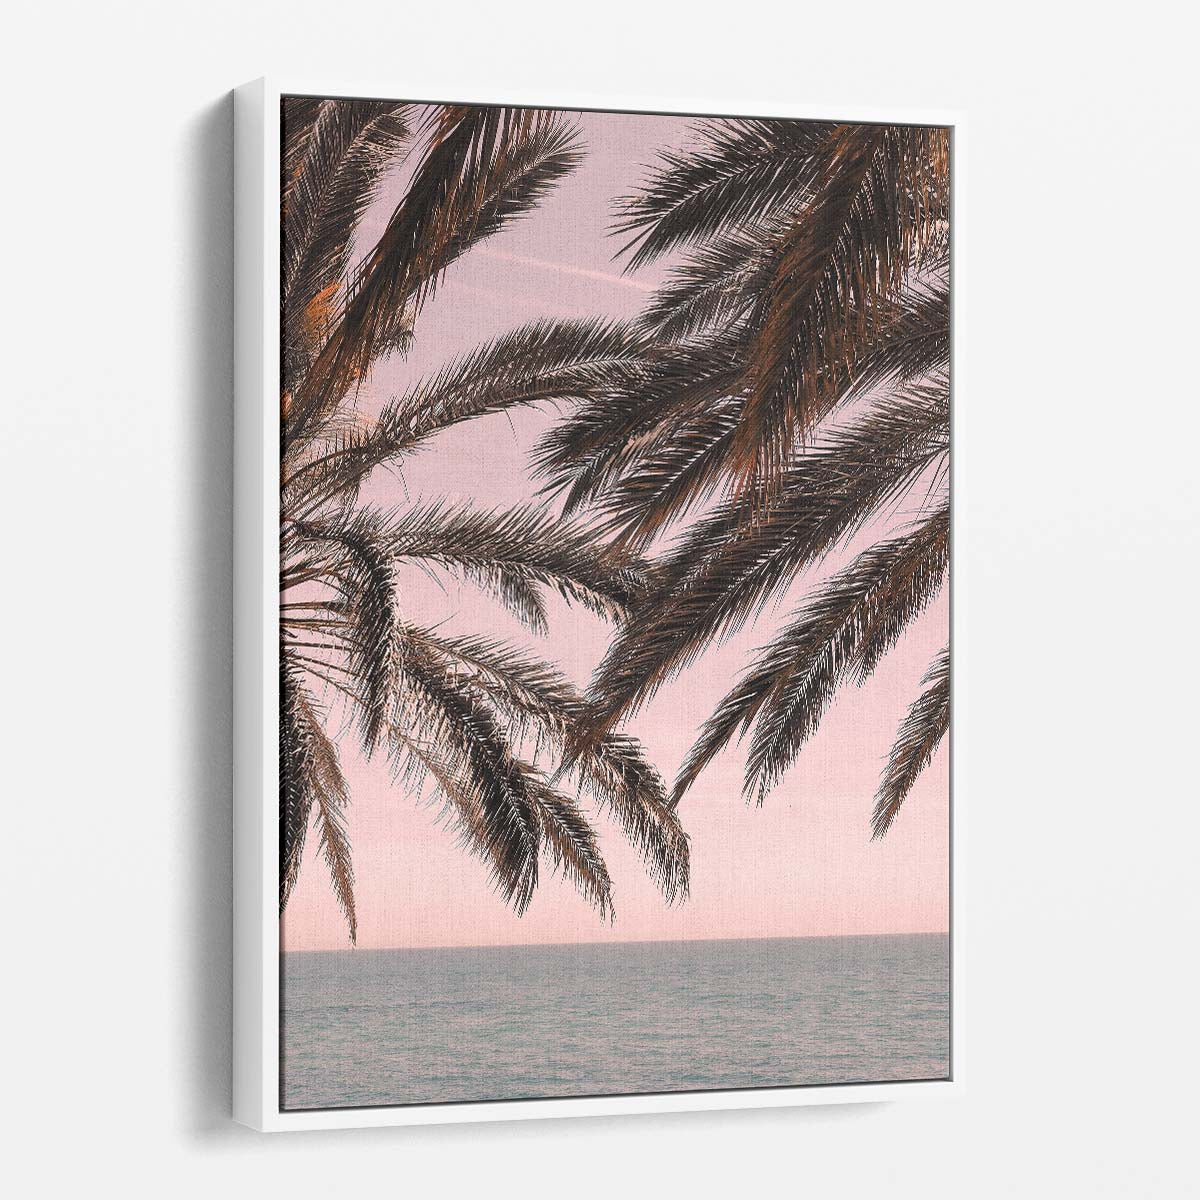 Exotic Palm Tree Seascape Photography, Pink Tropical Beach Sunset by Luxuriance Designs, made in USA